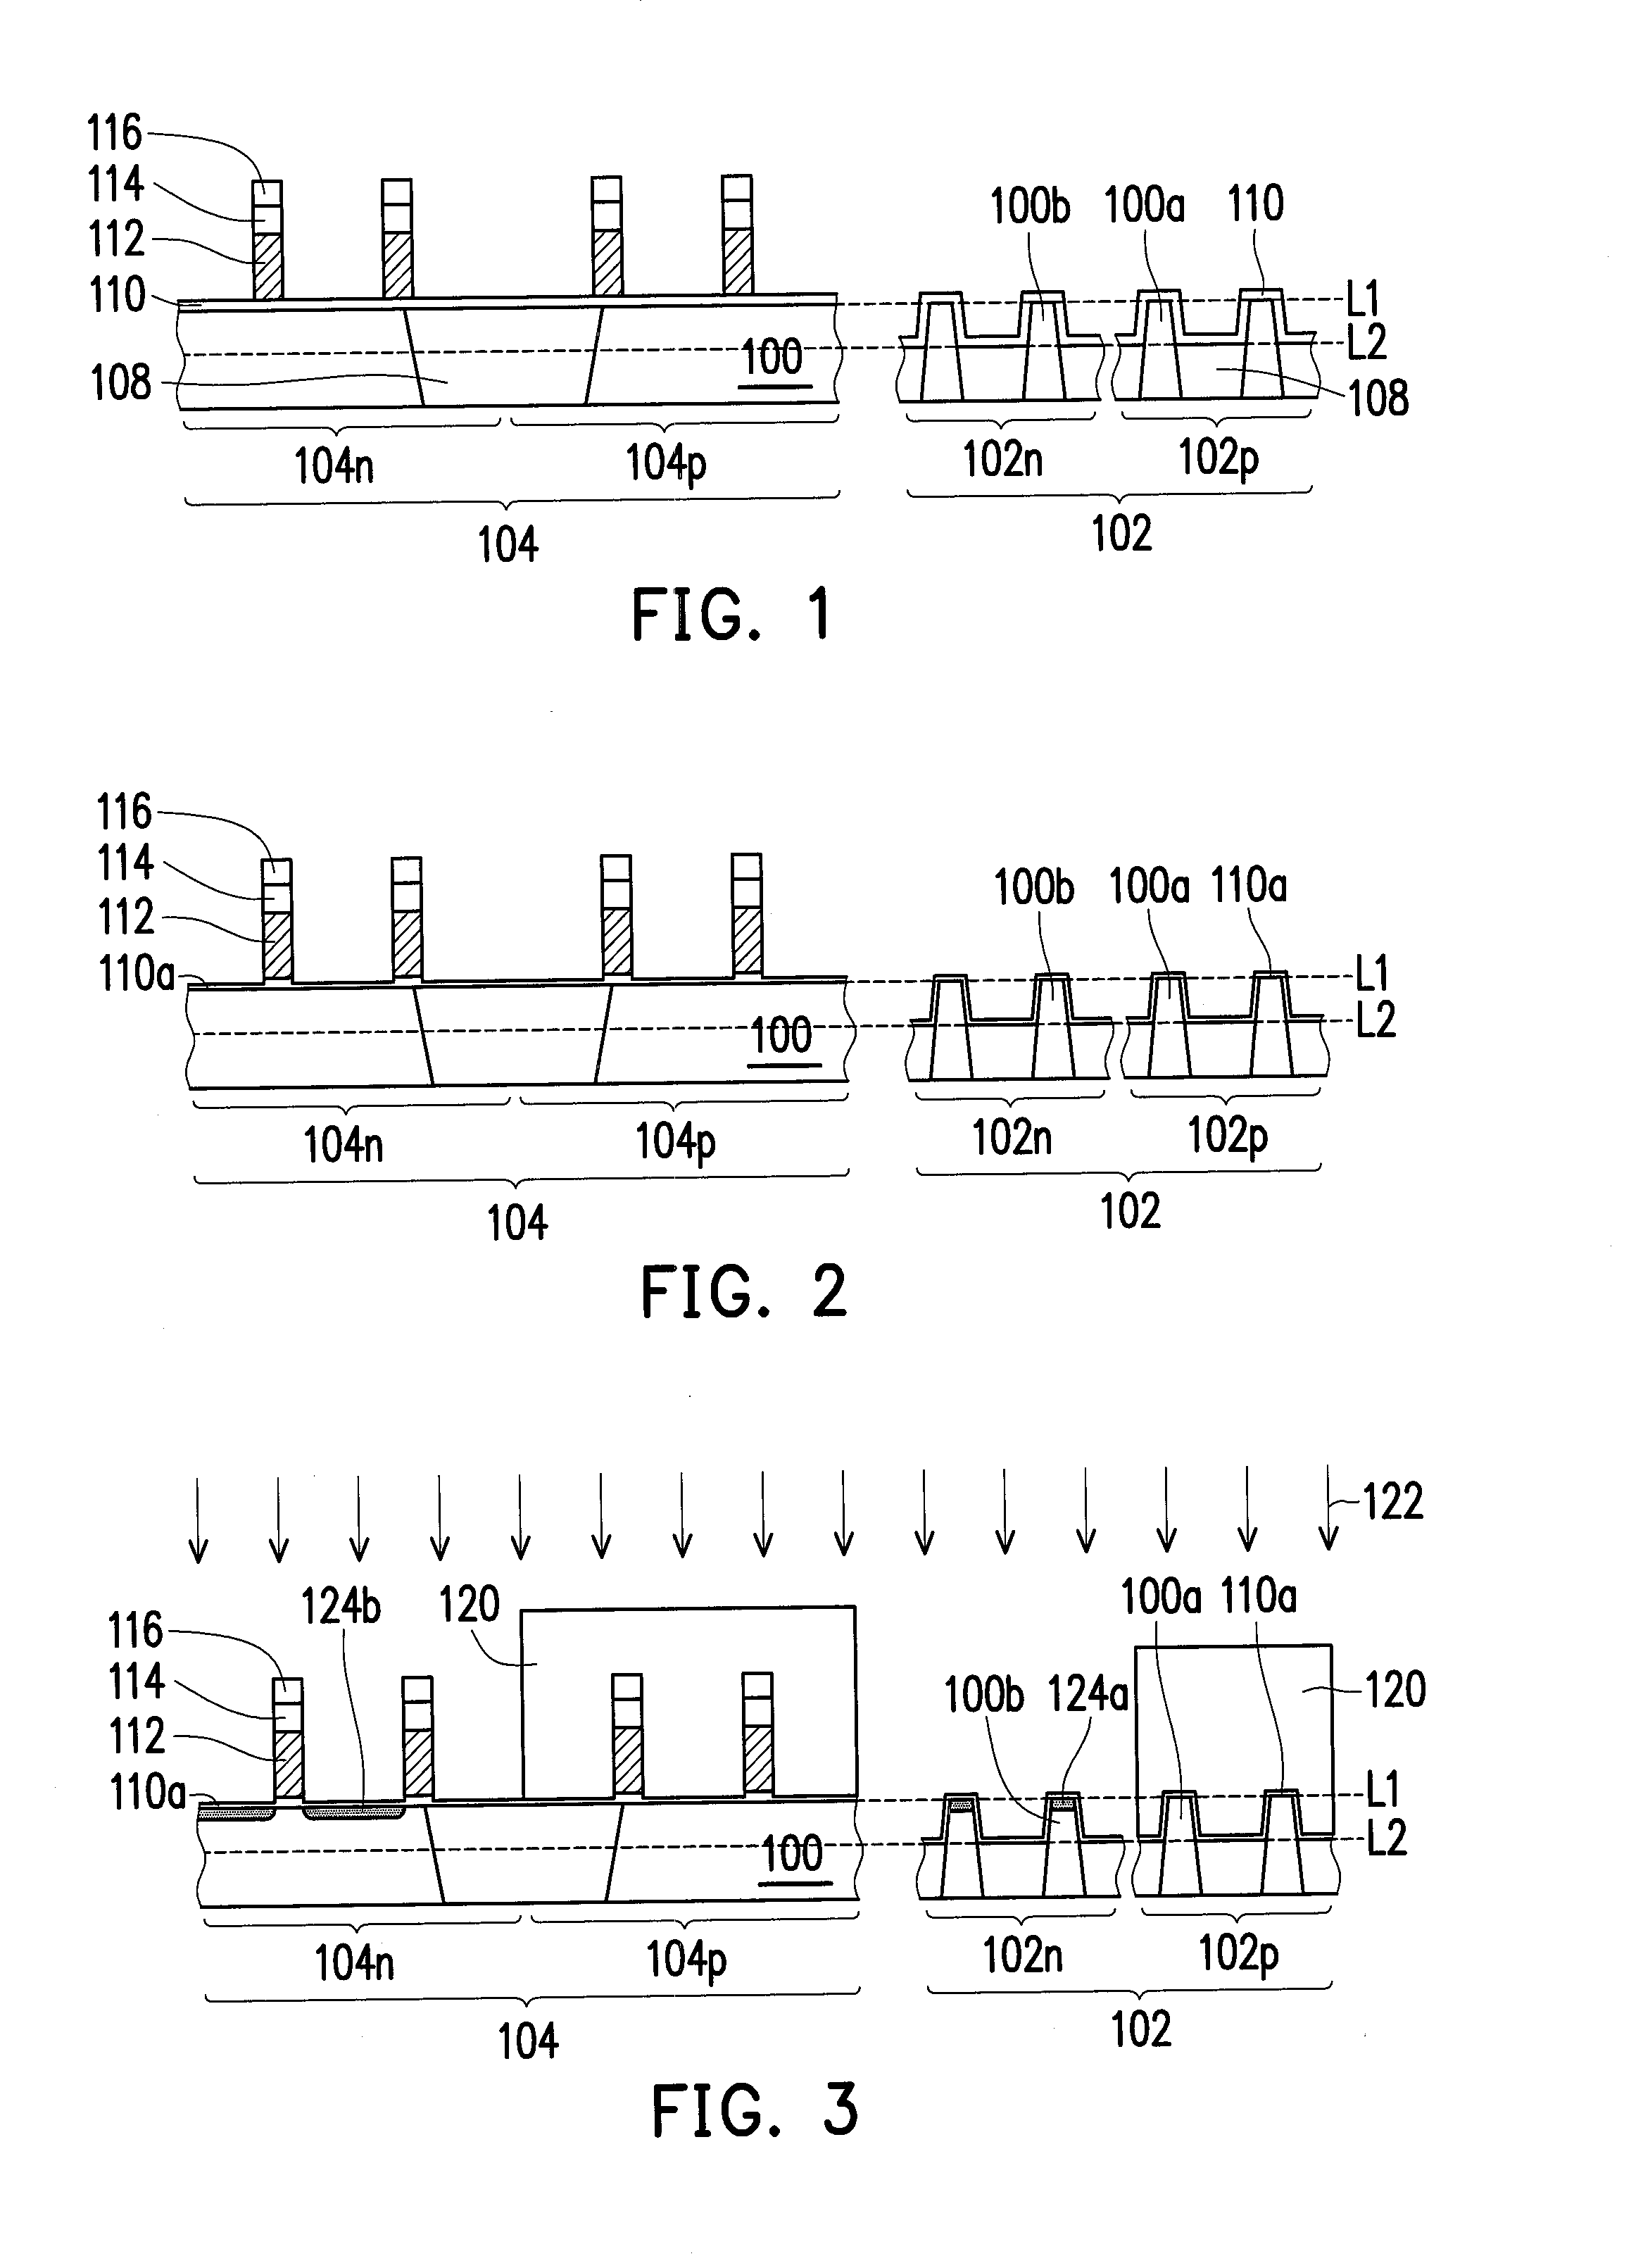 PROCESS FOR FABRICATING FIN-TYPE FIELD EFFECT TRANSISTOR (FinFET) STRUCTURE AND PRODUCT THEREOF